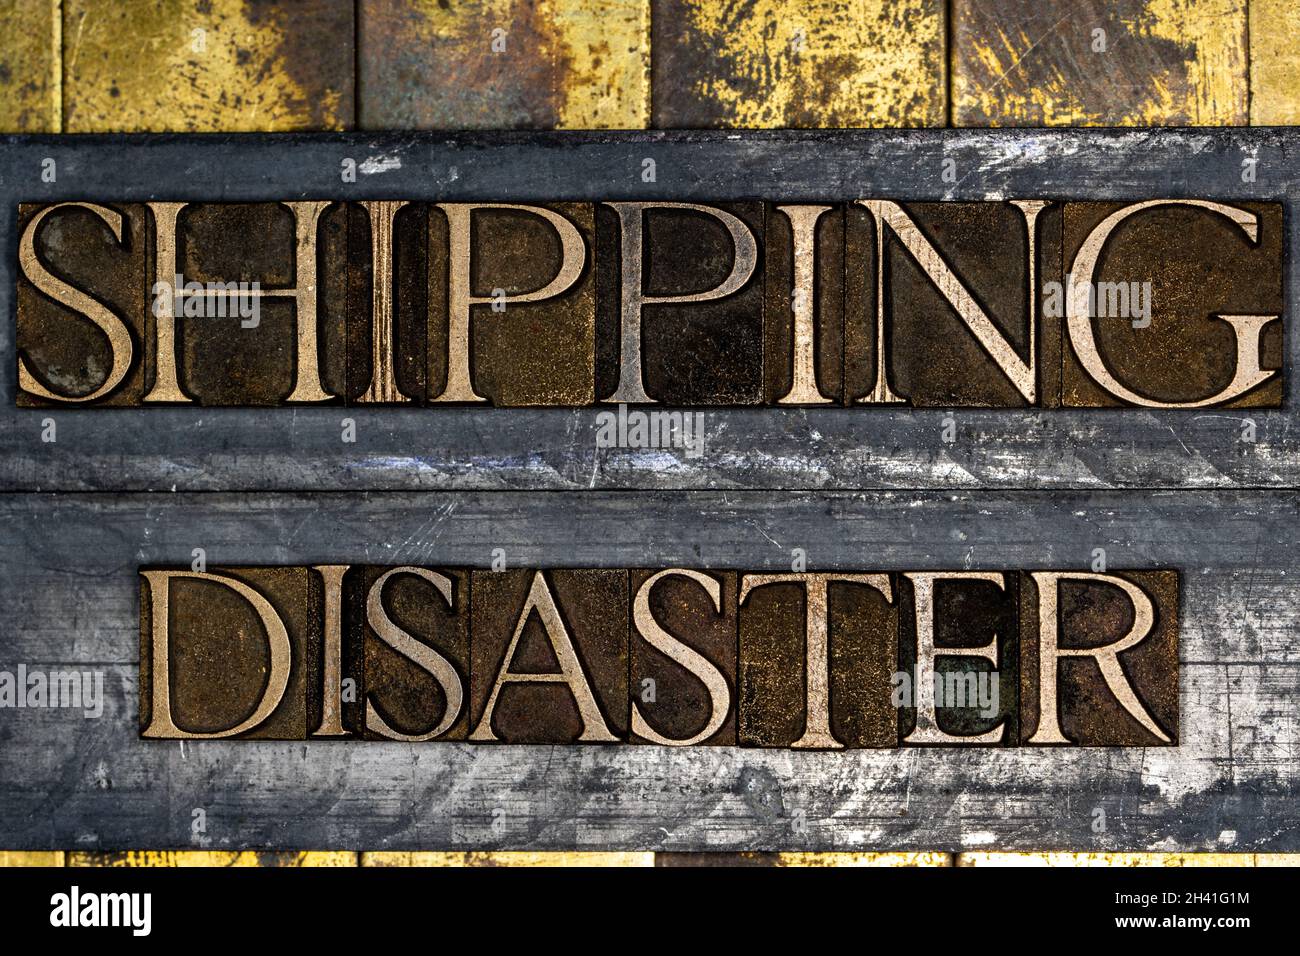 Shipping Disaster text on textured grunge copper and vintage gold background Stock Photo